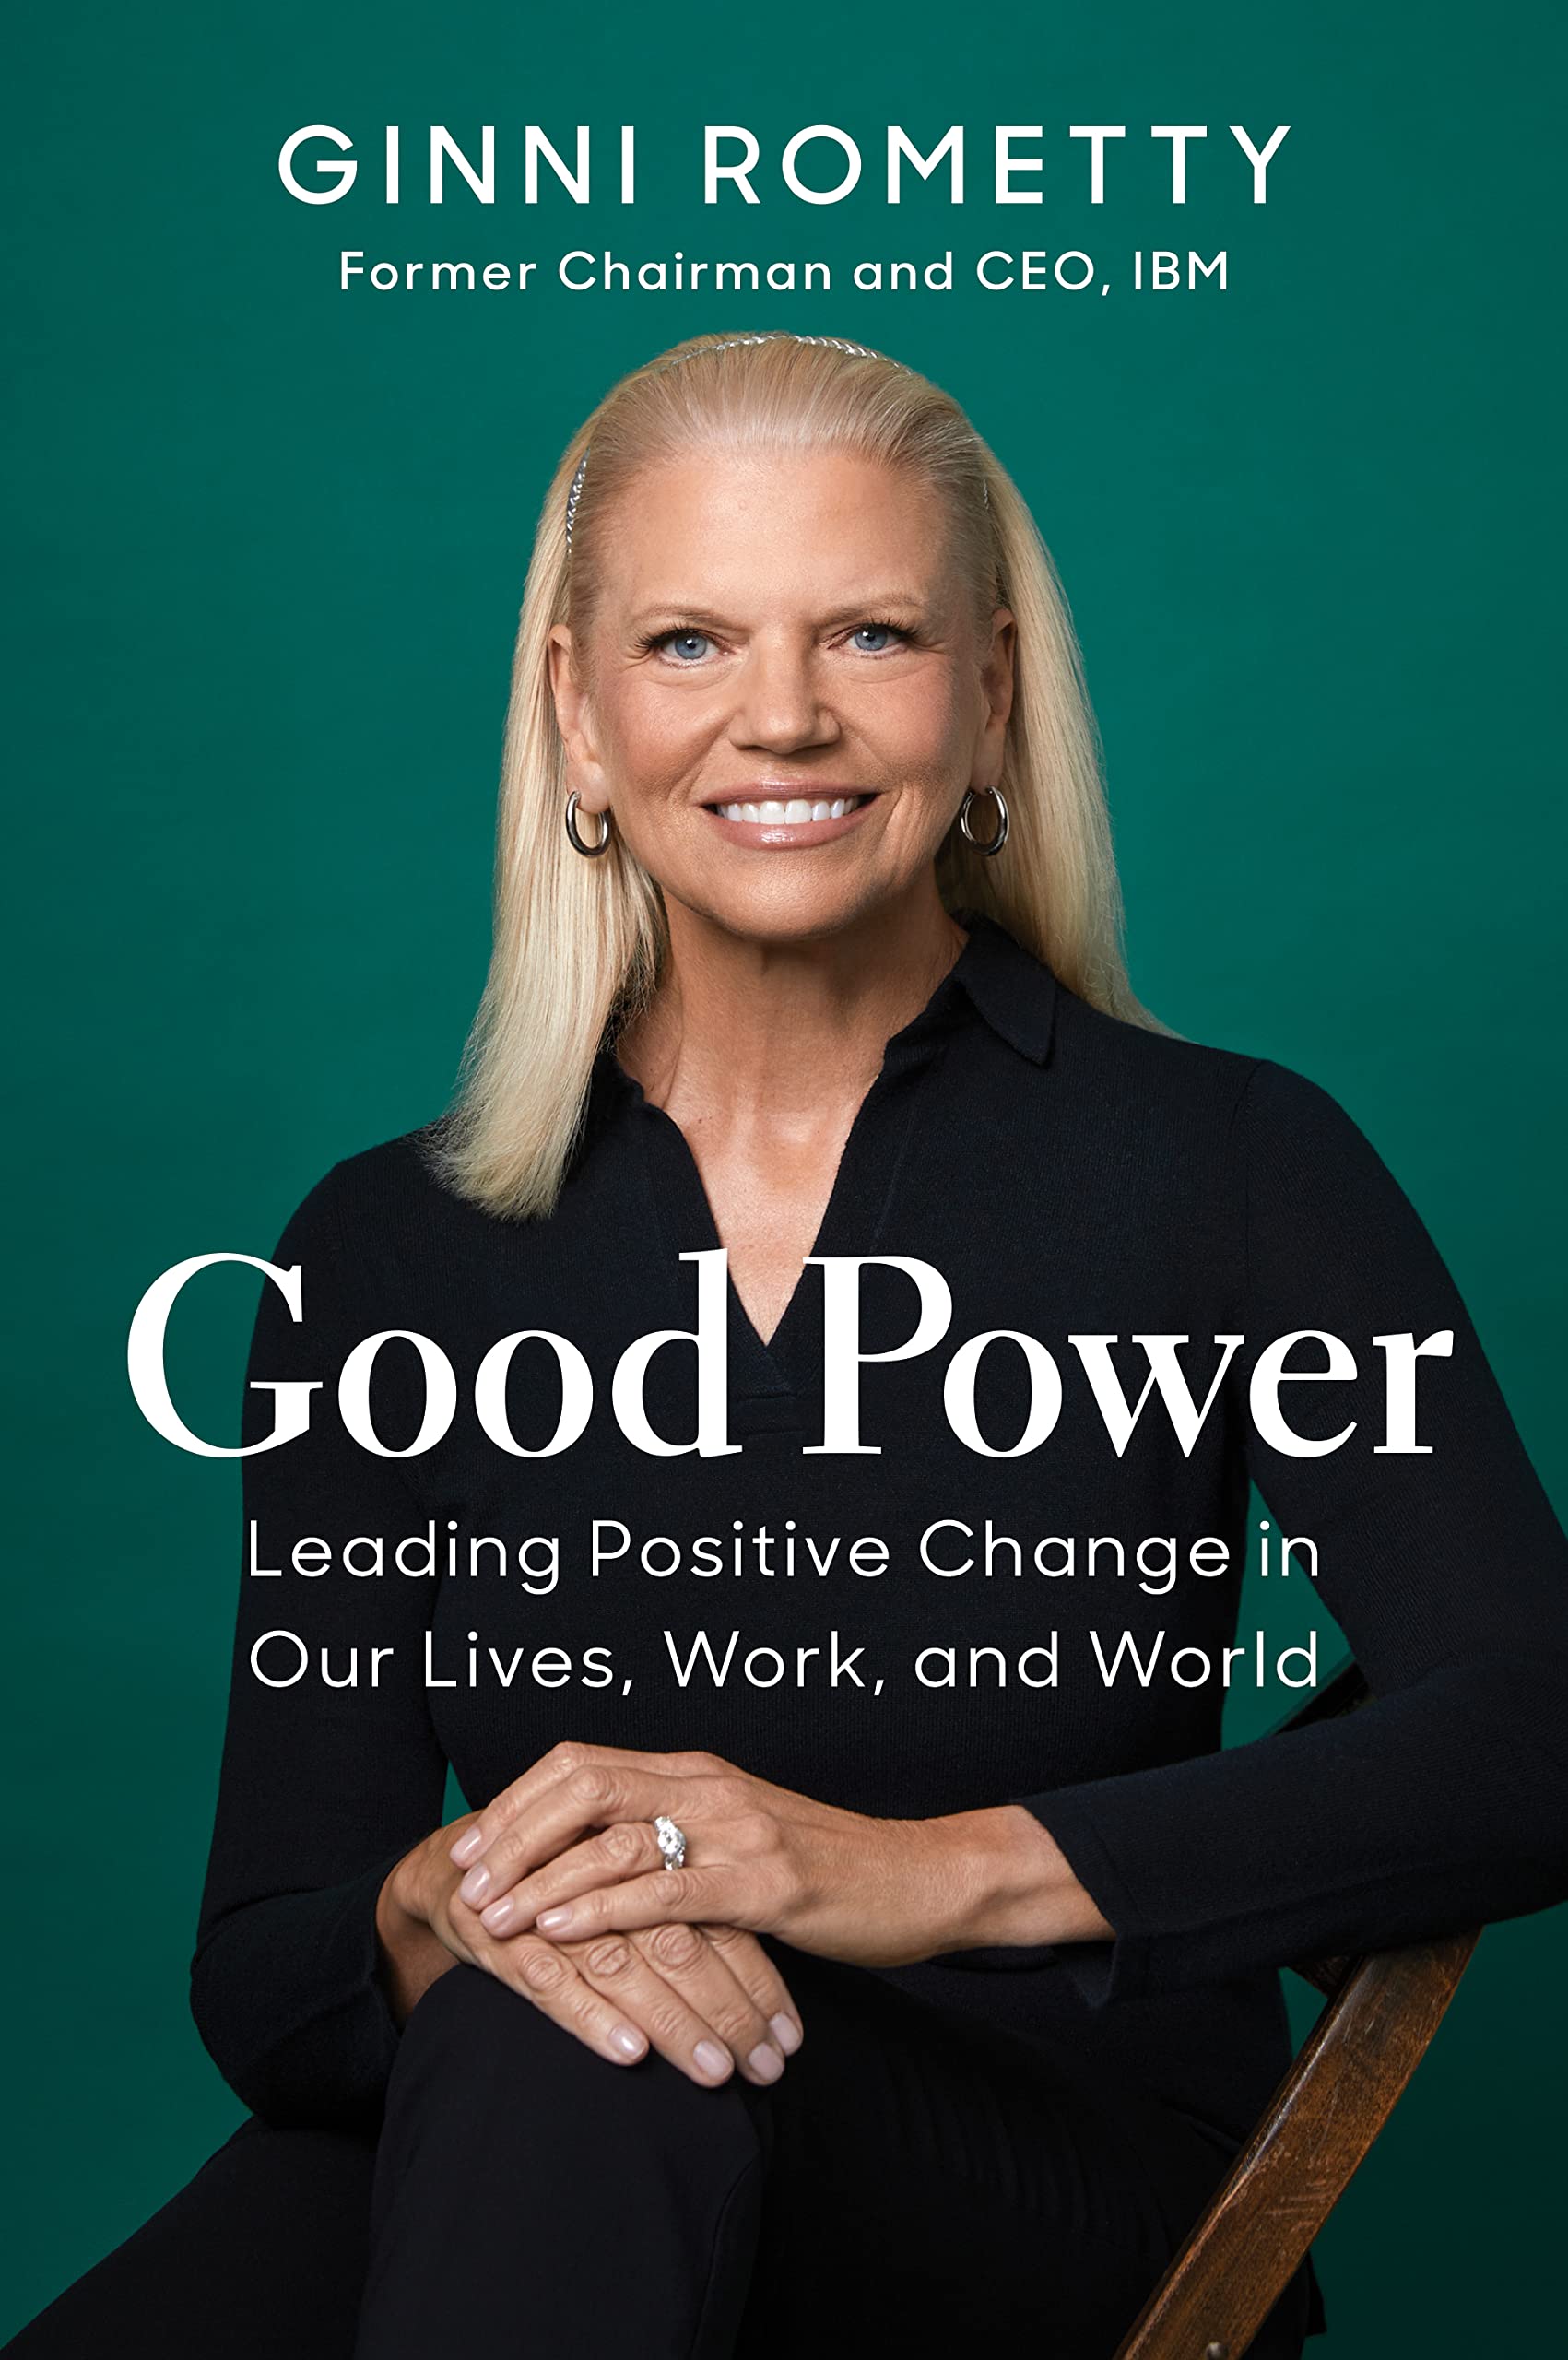 Leading　Ginni　by　Good　Change　Lives,　World　in　Our　and　Work,　Positive　Nuria　Store　Power:　Rometty